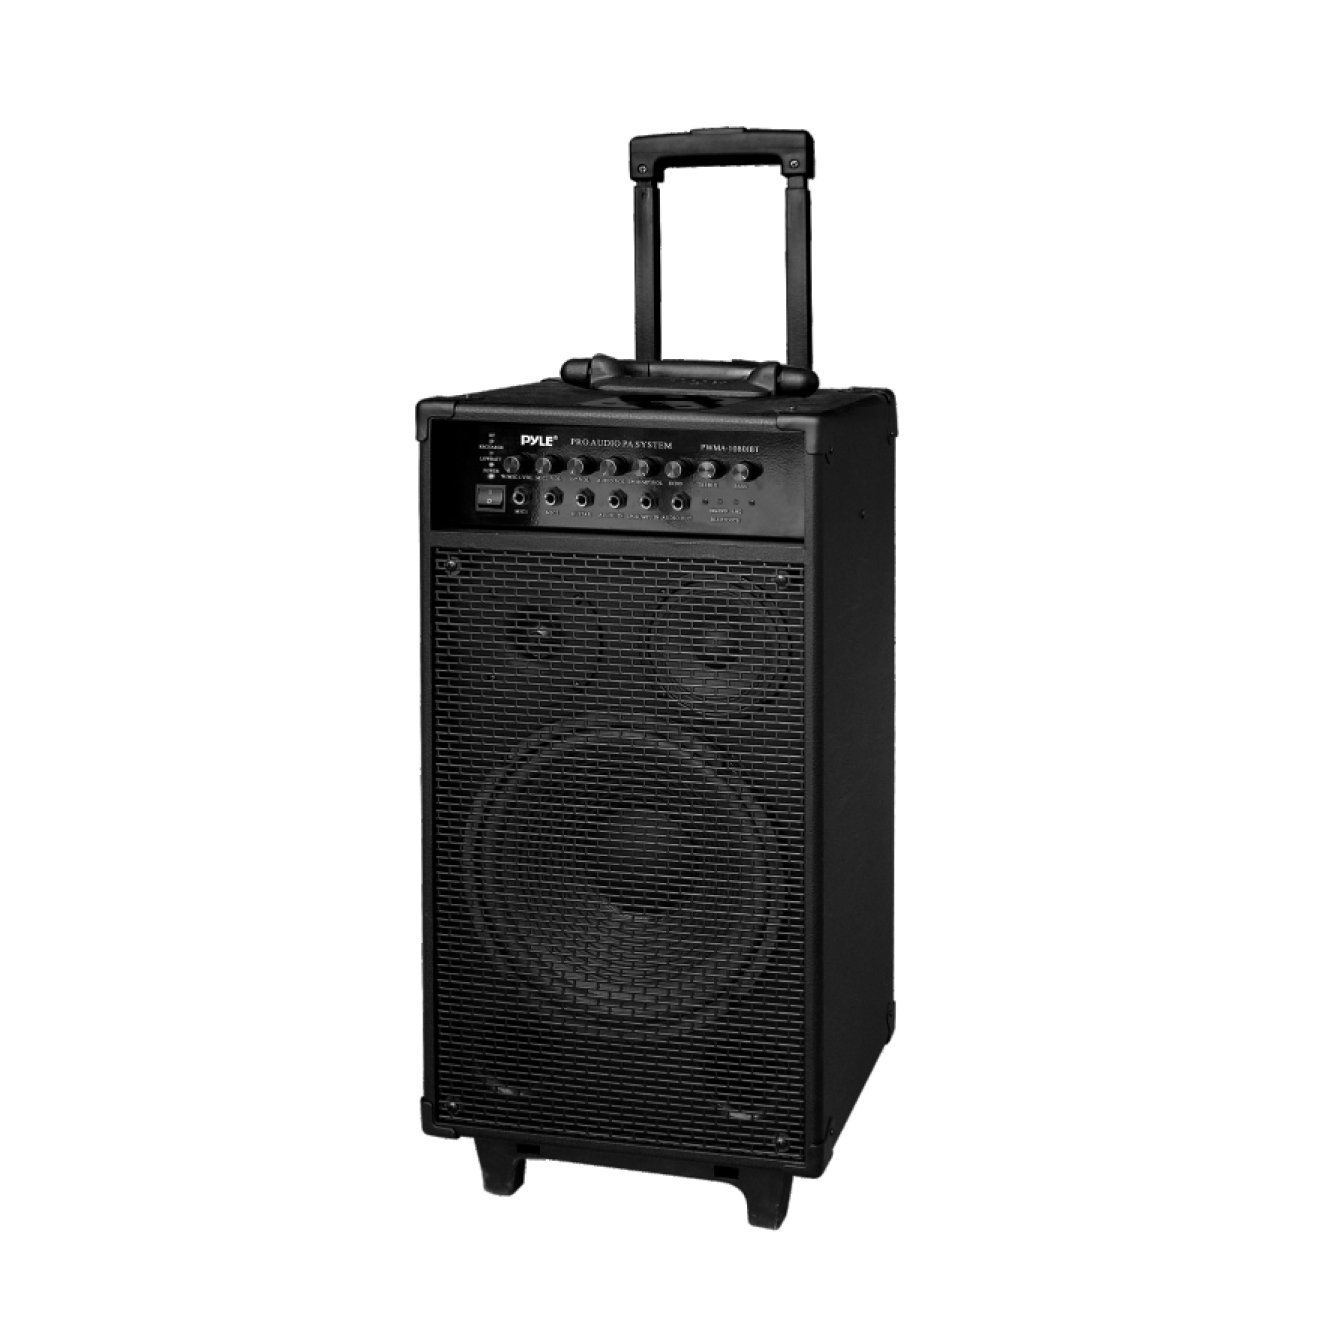 Pyle Wireless Portable PA Speaker System - 800W Bluetooth Compatible Rechargeable Battery Powered Outdoor Sound Speaker Microphone Set w/ 30-Pin iPod dock, Wheels - 1/4